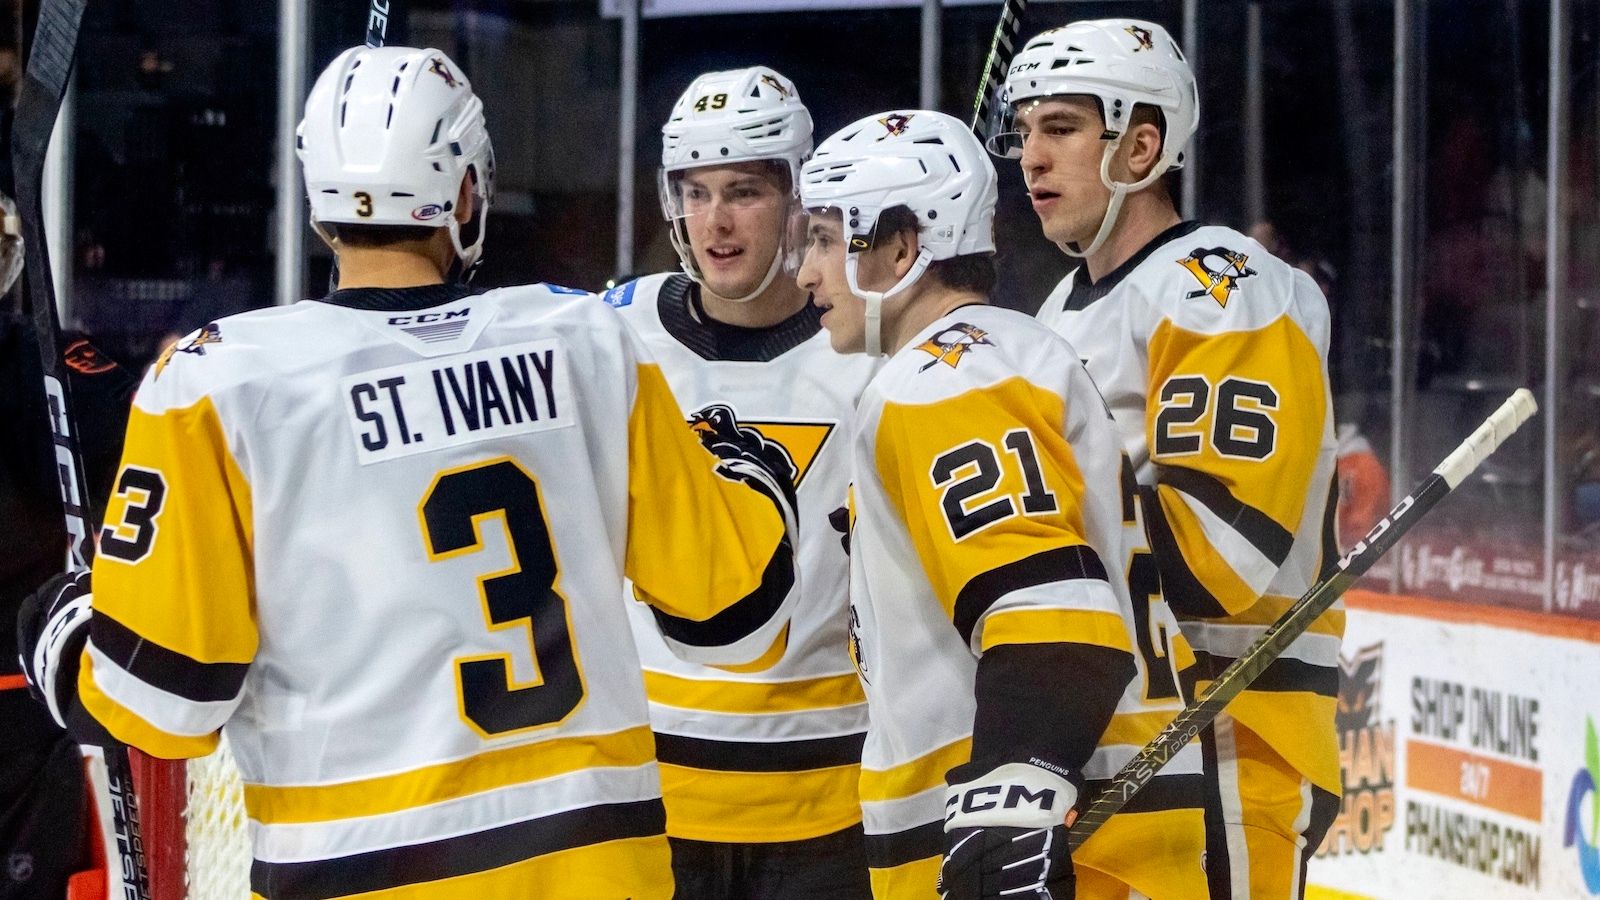 Sidney Crosby's leadership helps Penguins' youngsters succeed